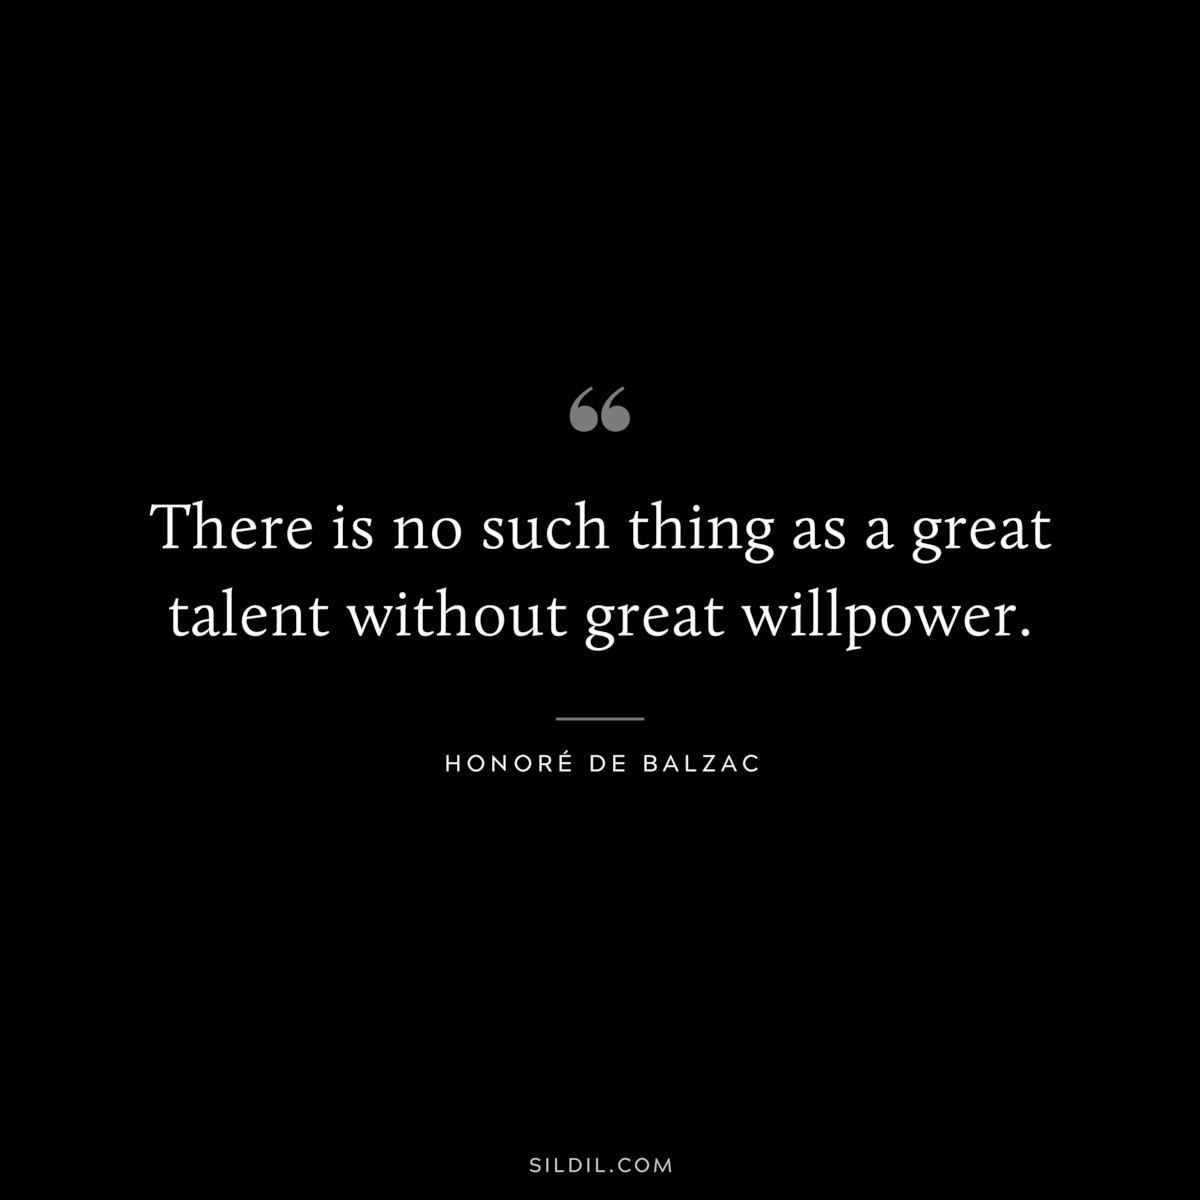 There is no such thing as a great talent without great willpower. ― Honoré de Balzac